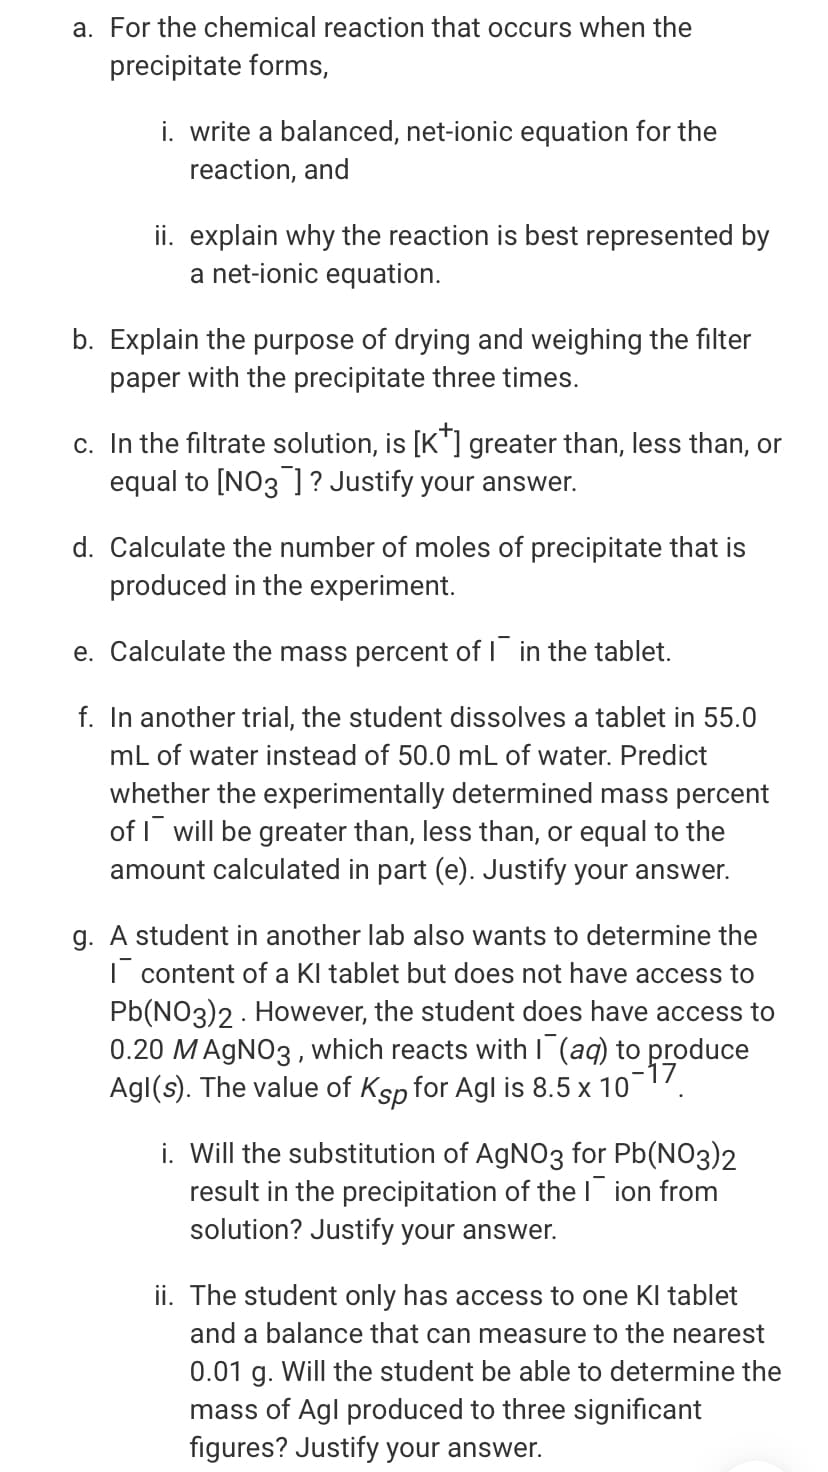 a. For the chemical reaction that occurs when the
precipitate forms,
i. write a balanced, net-ionic equation for the
reaction, and
ii. explain why the reaction is best represented by
a net-ionic equation.
b. Explain the purpose of drying and weighing the filter
paper with the precipitate three times.
c. In the filtrate solution, is [K"] greater than, less than, or
equal to [NO3 ]? Justify your answer.
d. Calculate the number of moles of precipitate that is
produced in the experiment.
e. Calculate the mass percent of I in the tablet.
f. In another trial, the student dissolves a tablet in 55.0
mL of water instead of 50.0 mL of water. Predict
whether the experimentally determined mass percent
of I will be greater than, less than, or equal to the
amount calculated in part (e). Justify your answer.
g. A student in another lab also wants to determine the
| content of a Kl tablet but does not have access to
Pb(NO3)2 - However, the student does have access to
0.20 MAGNO3 , which reacts with I (aq) to produce
Agl(s). The value of Ksp for Agl is 8.5 x 107.
i. Will the substitution of AgNO3 for Pb(NO3)2
result in the precipitation of thel ion from
solution? Justify your answer.
ii. The student only has access to one KI tablet
and a balance that can measure to the nearest
0.01 g. Will the student be able to determine the
mass of Agl produced to three significant
figures? Justify your answer.
